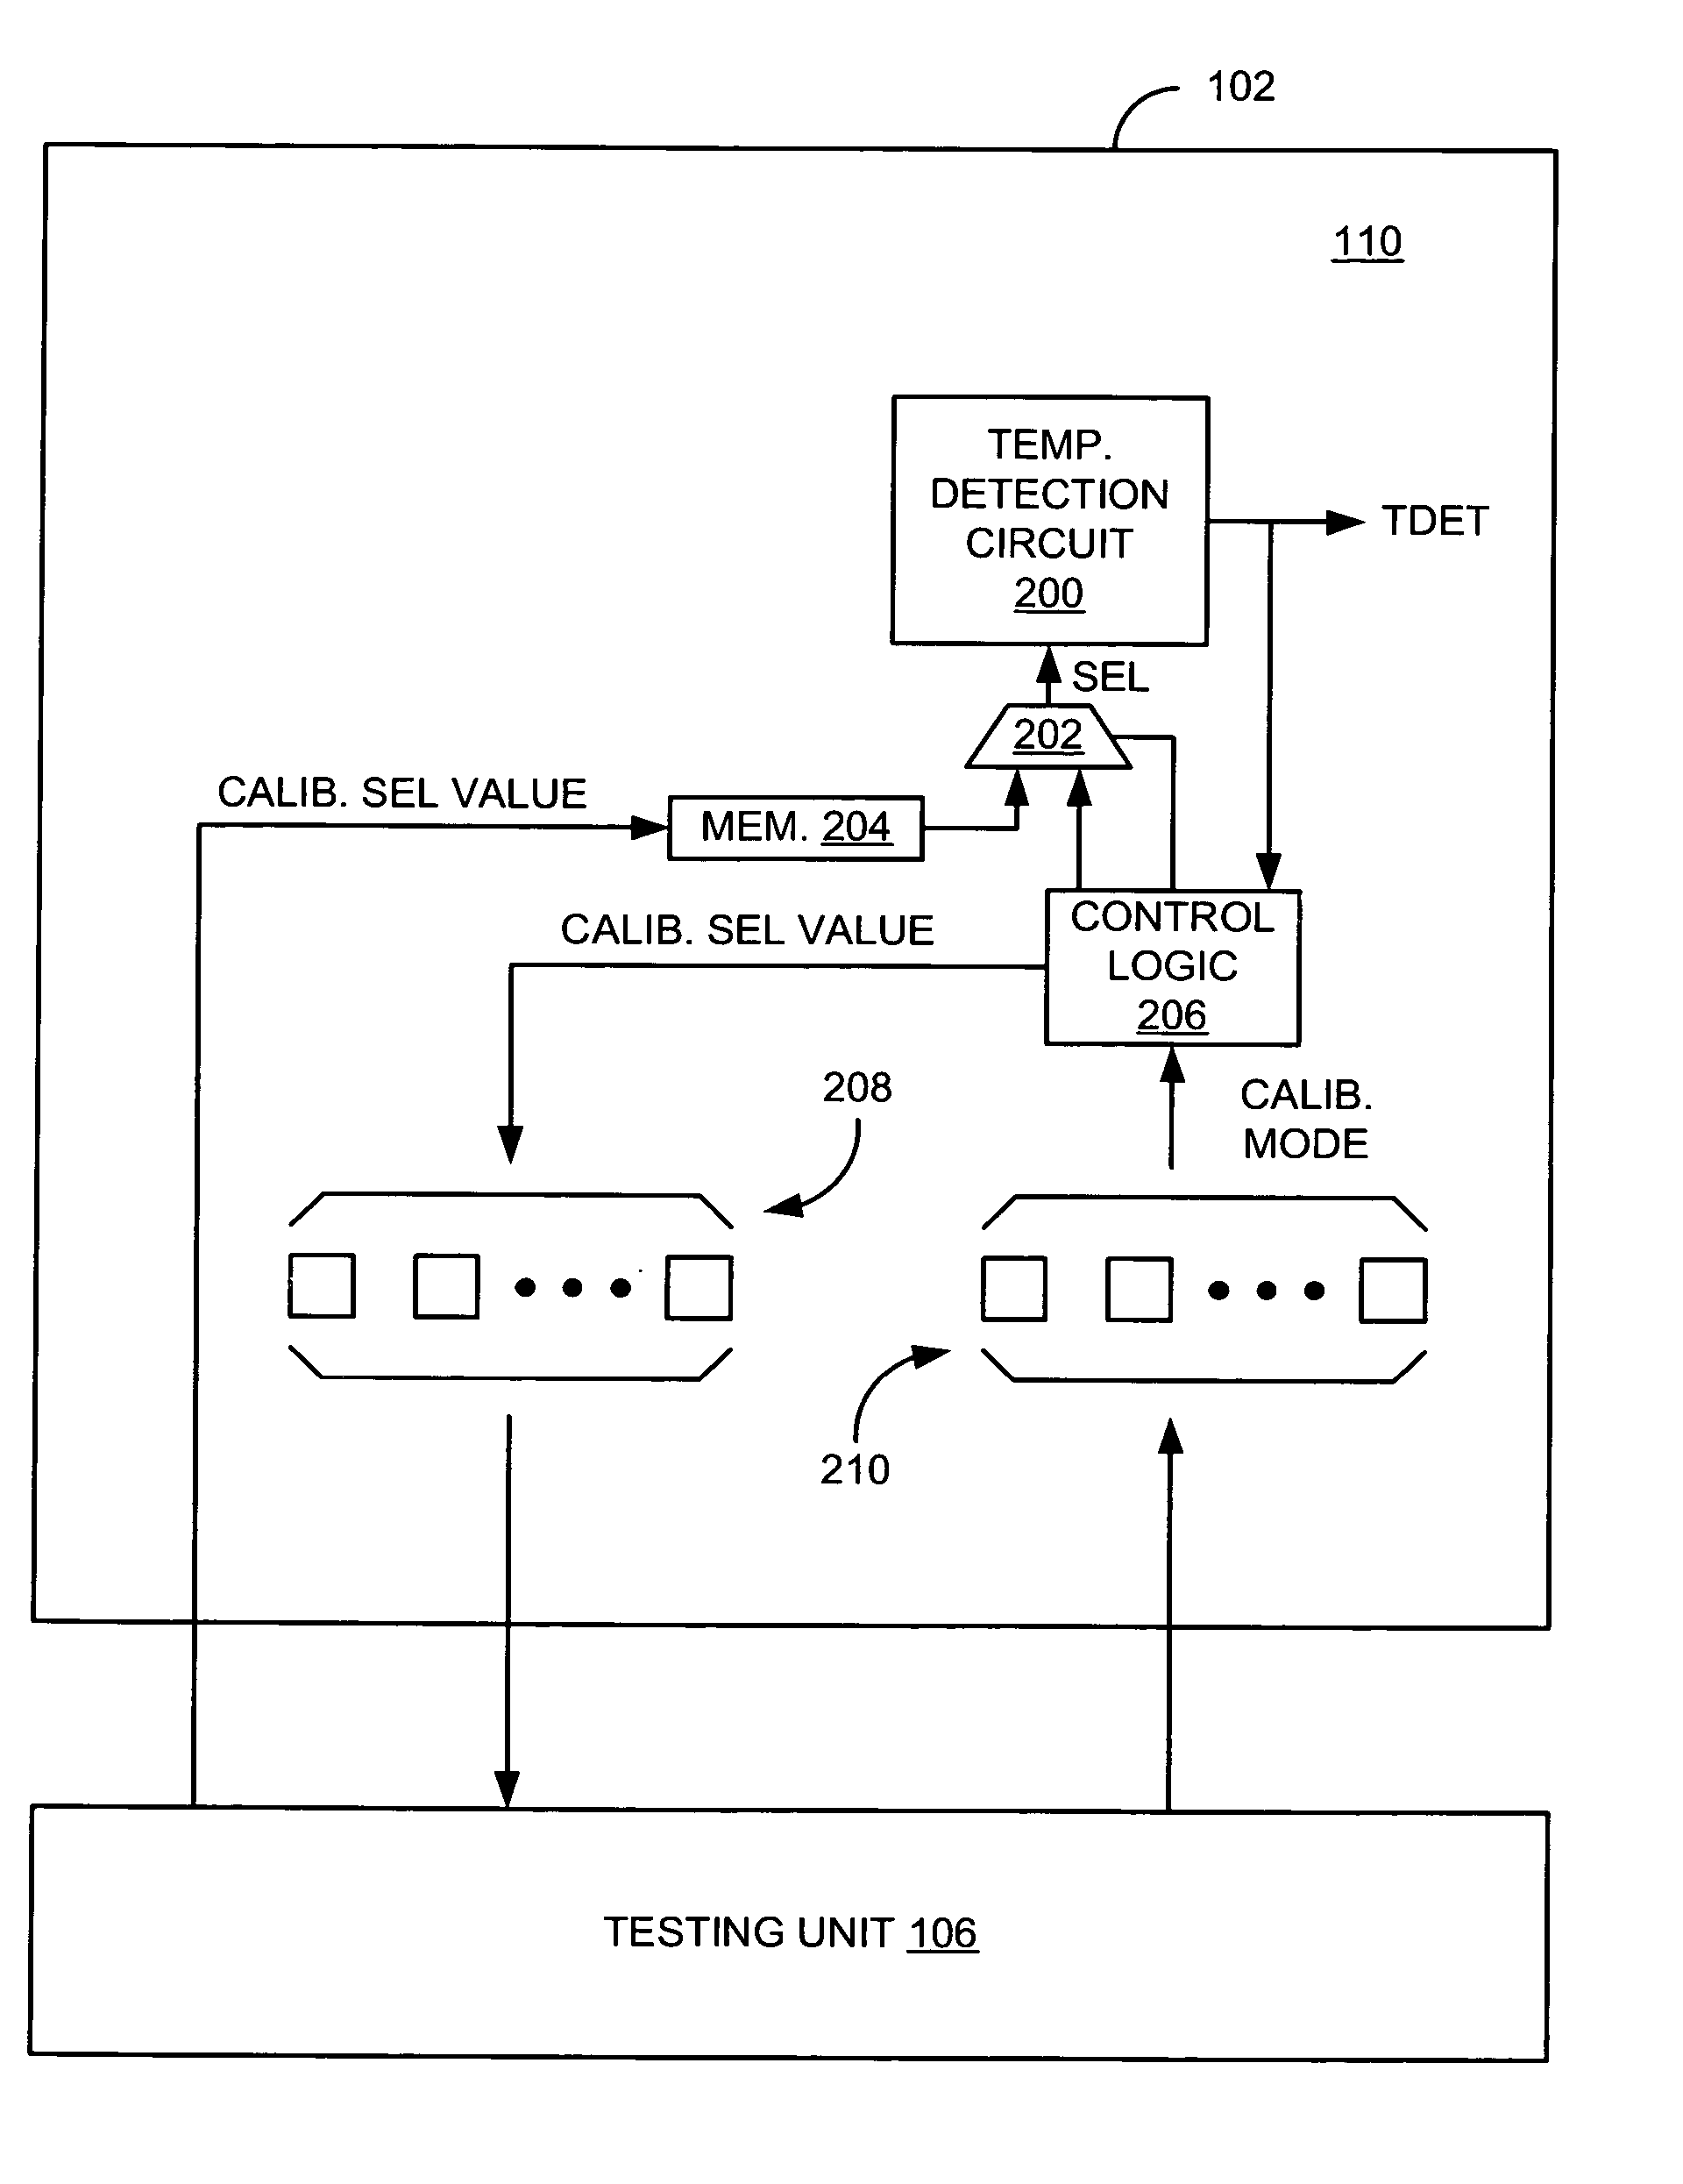 Integrated circuit die including a temperature detection circuit, and system and methods for calibrating the temperature detection circuit